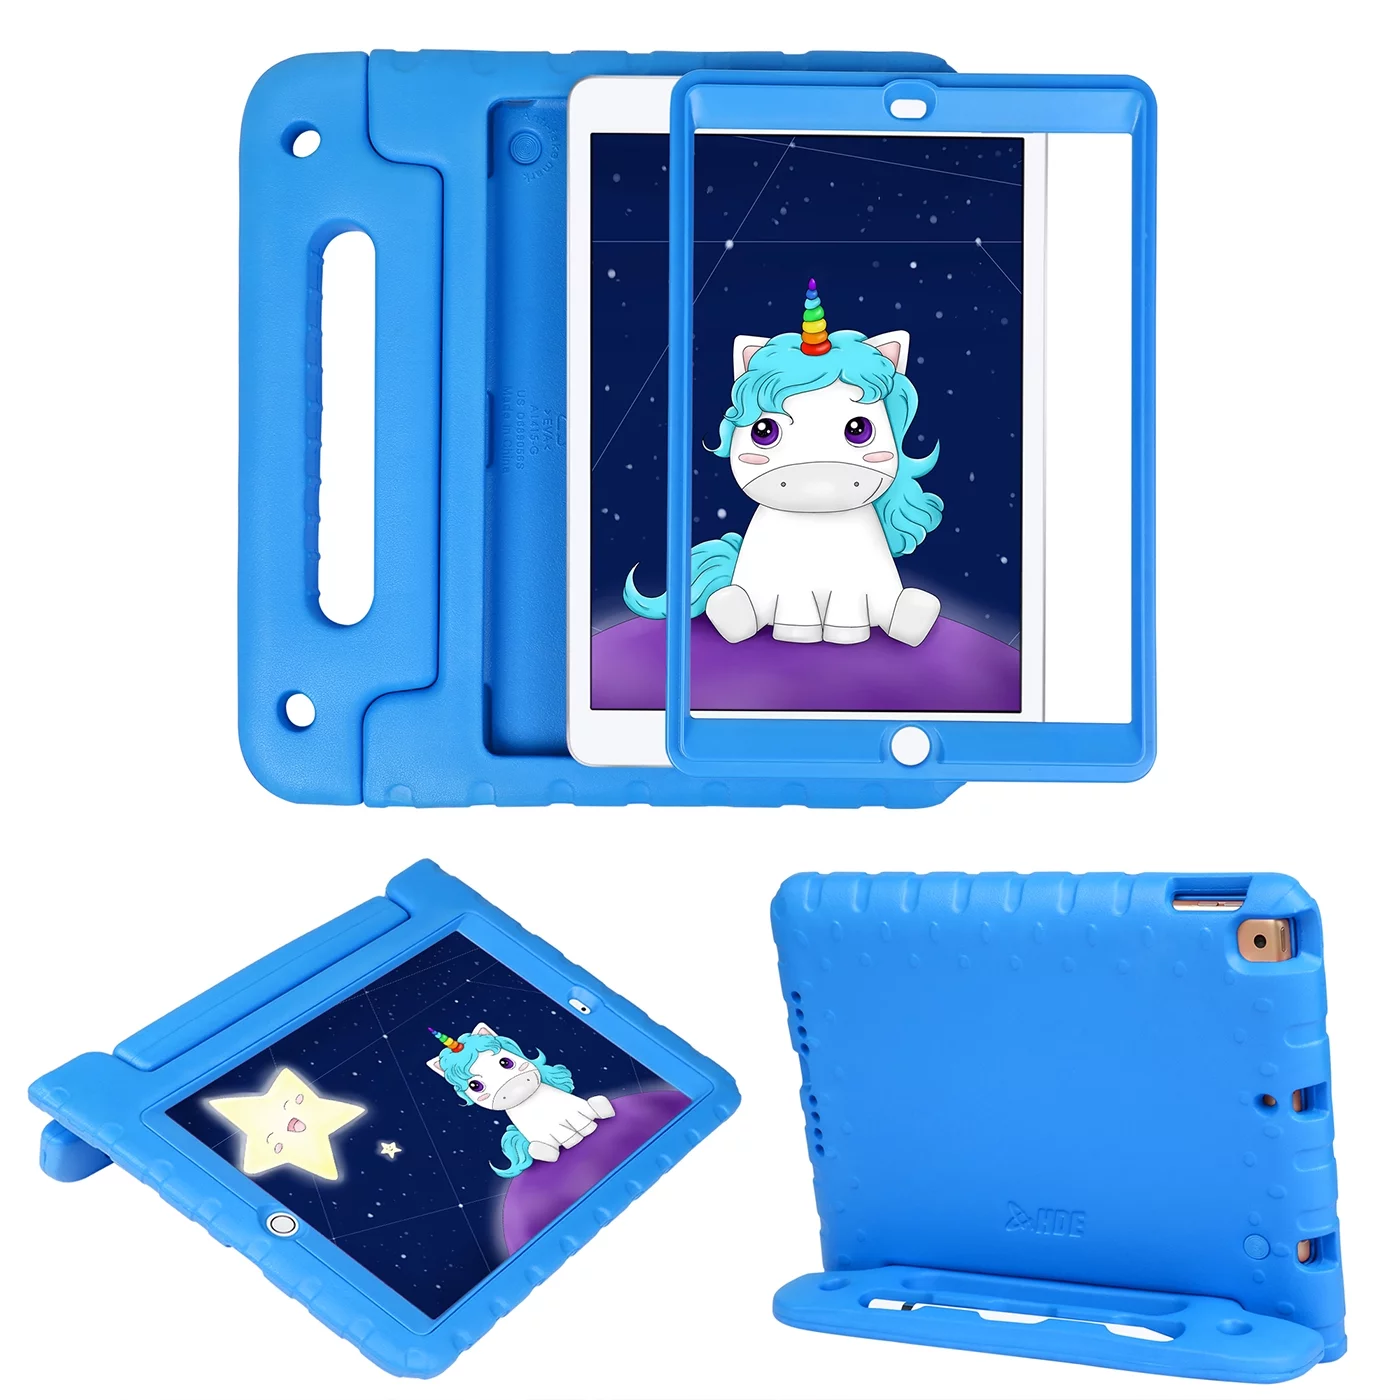 HDE Kids iPad Case with Built-In Screen Protector for 2021 9th Generation iPad 10.2 Inch, 2020 8th Gen, 2019 7th Gen - Blue